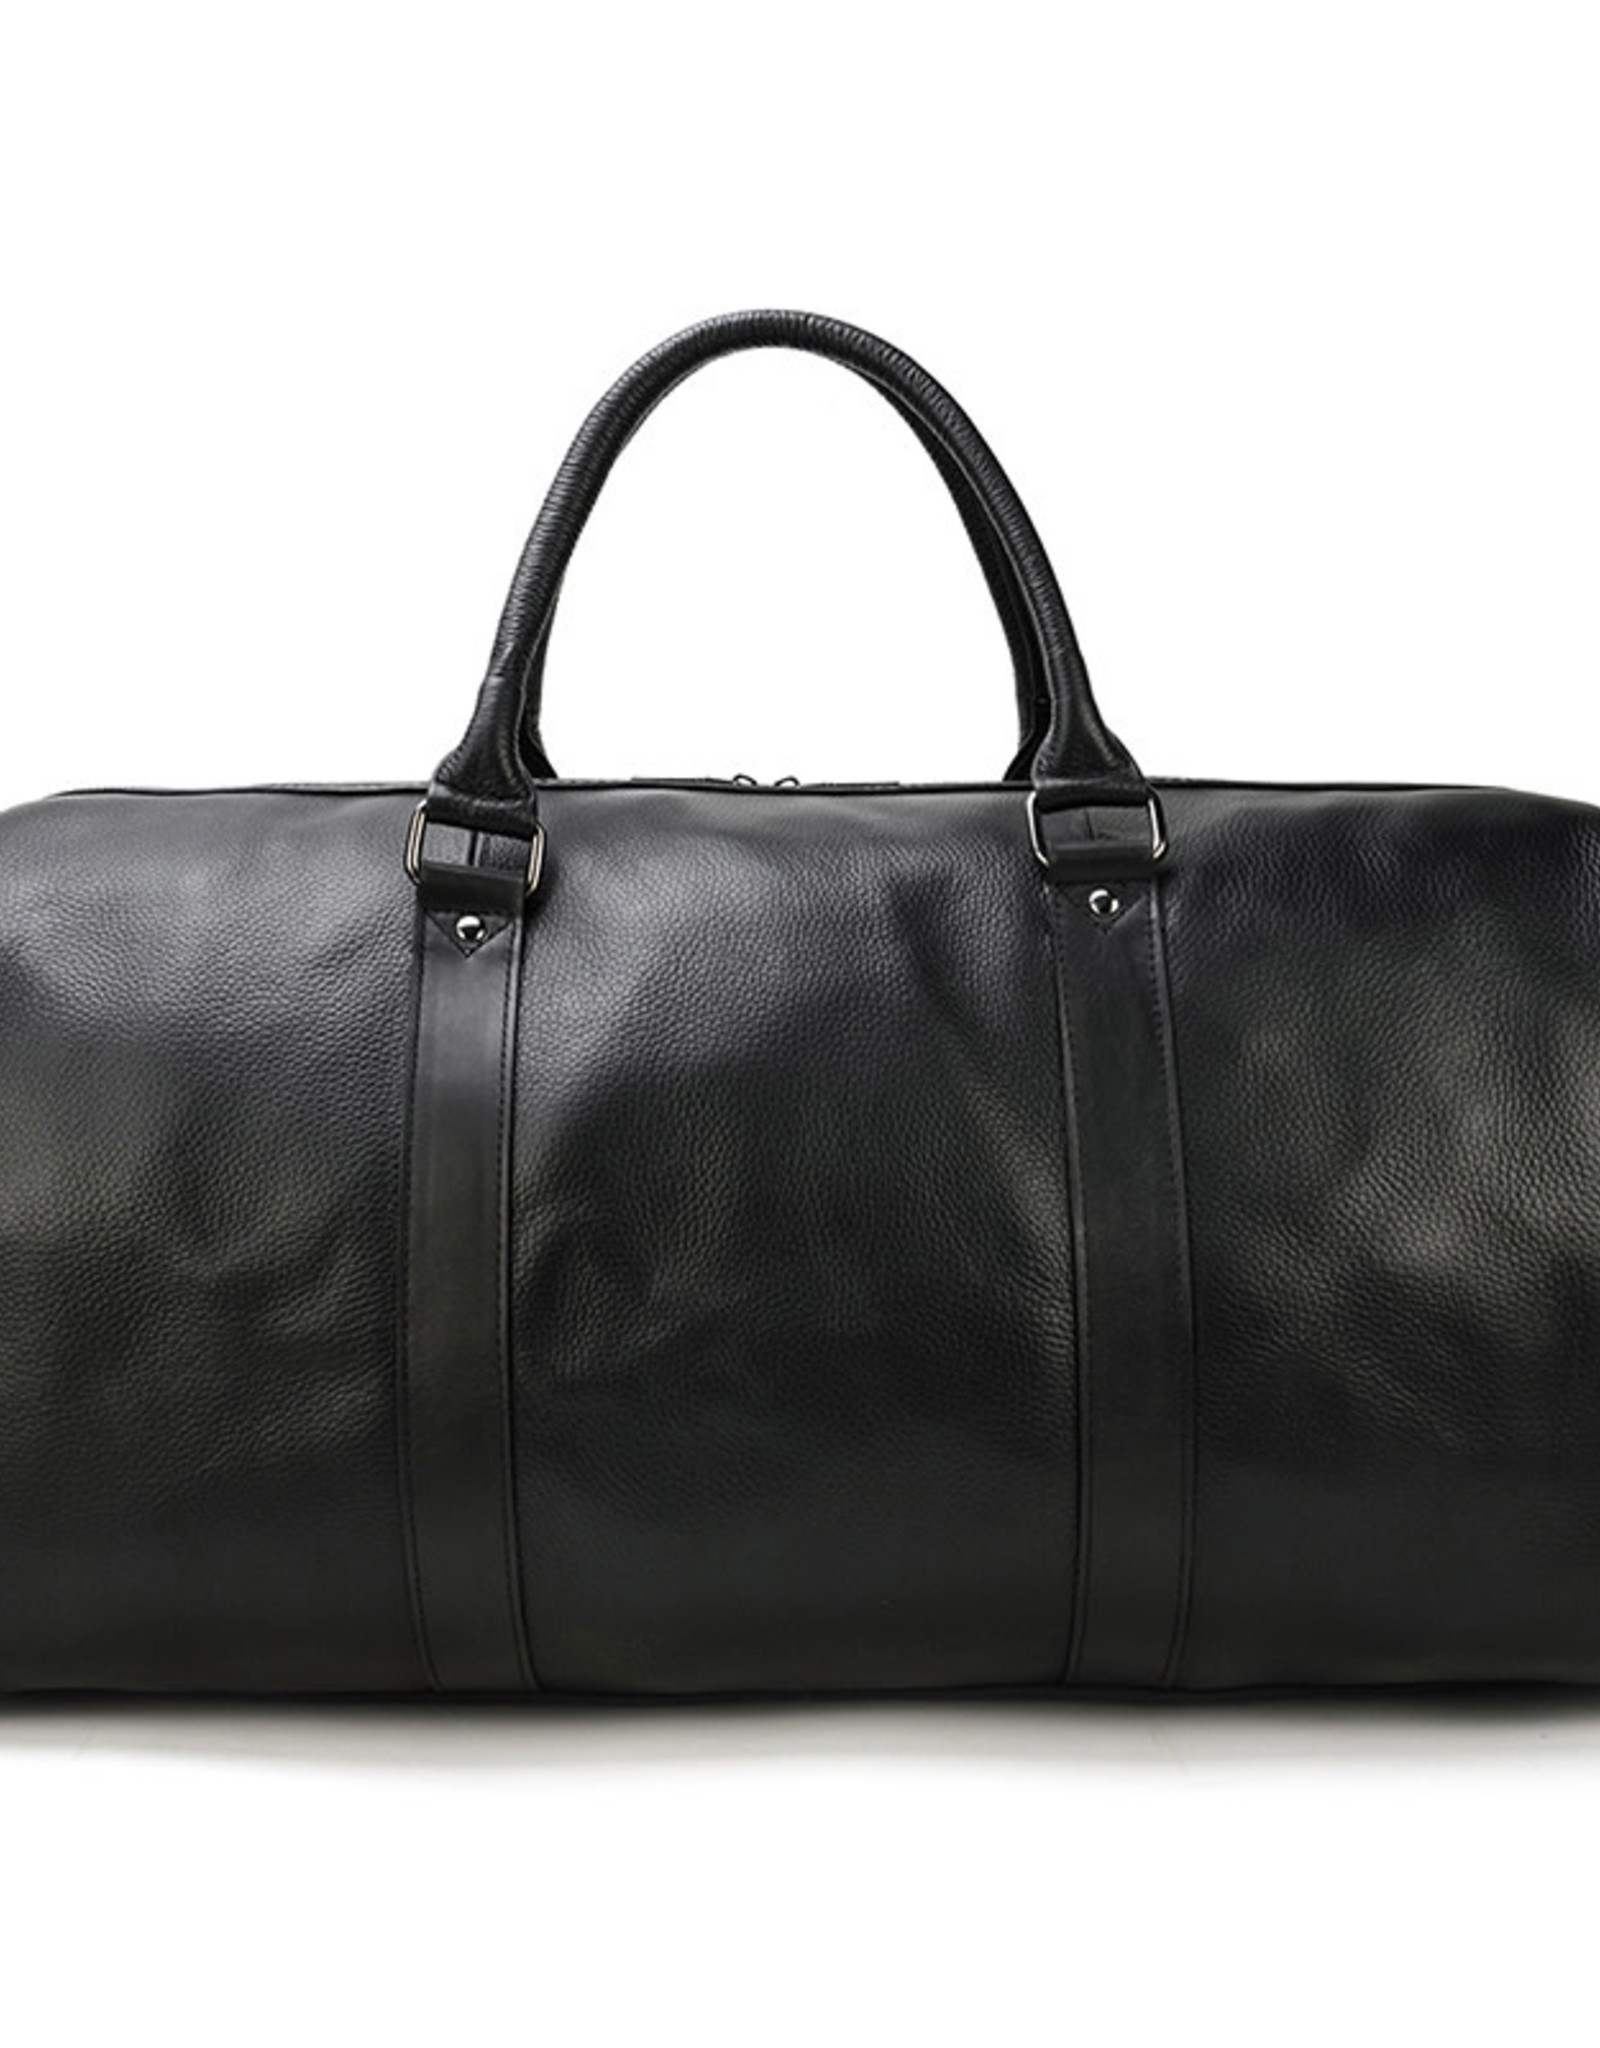 Aiden Travel Luggage Bag Genuine Leather